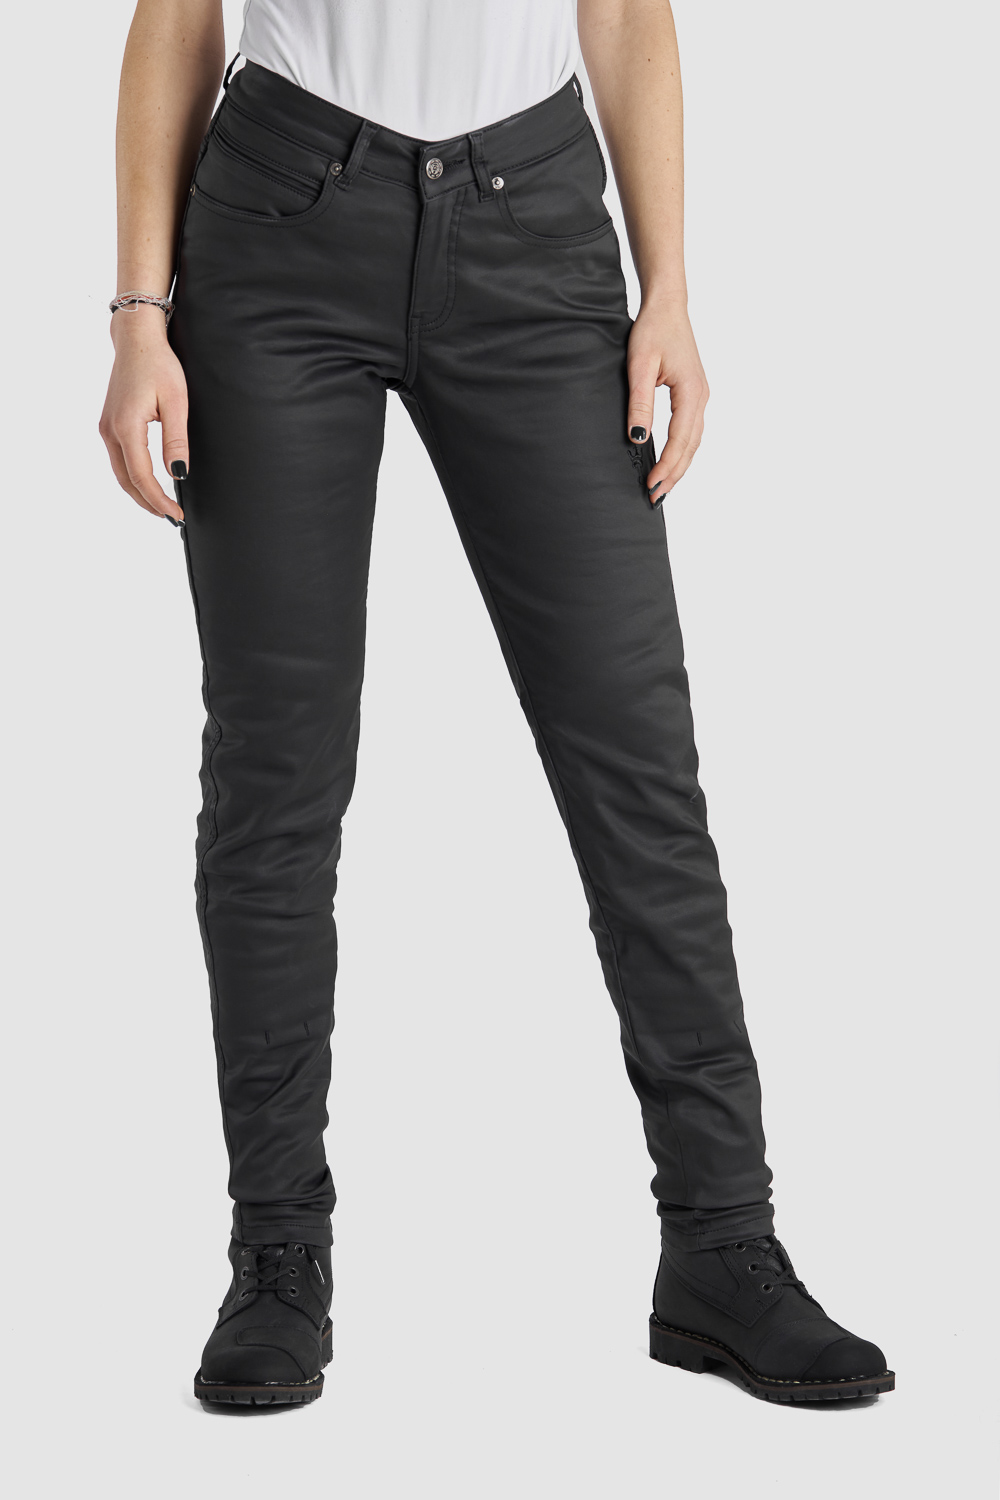 Motorcycle Jeans for Women